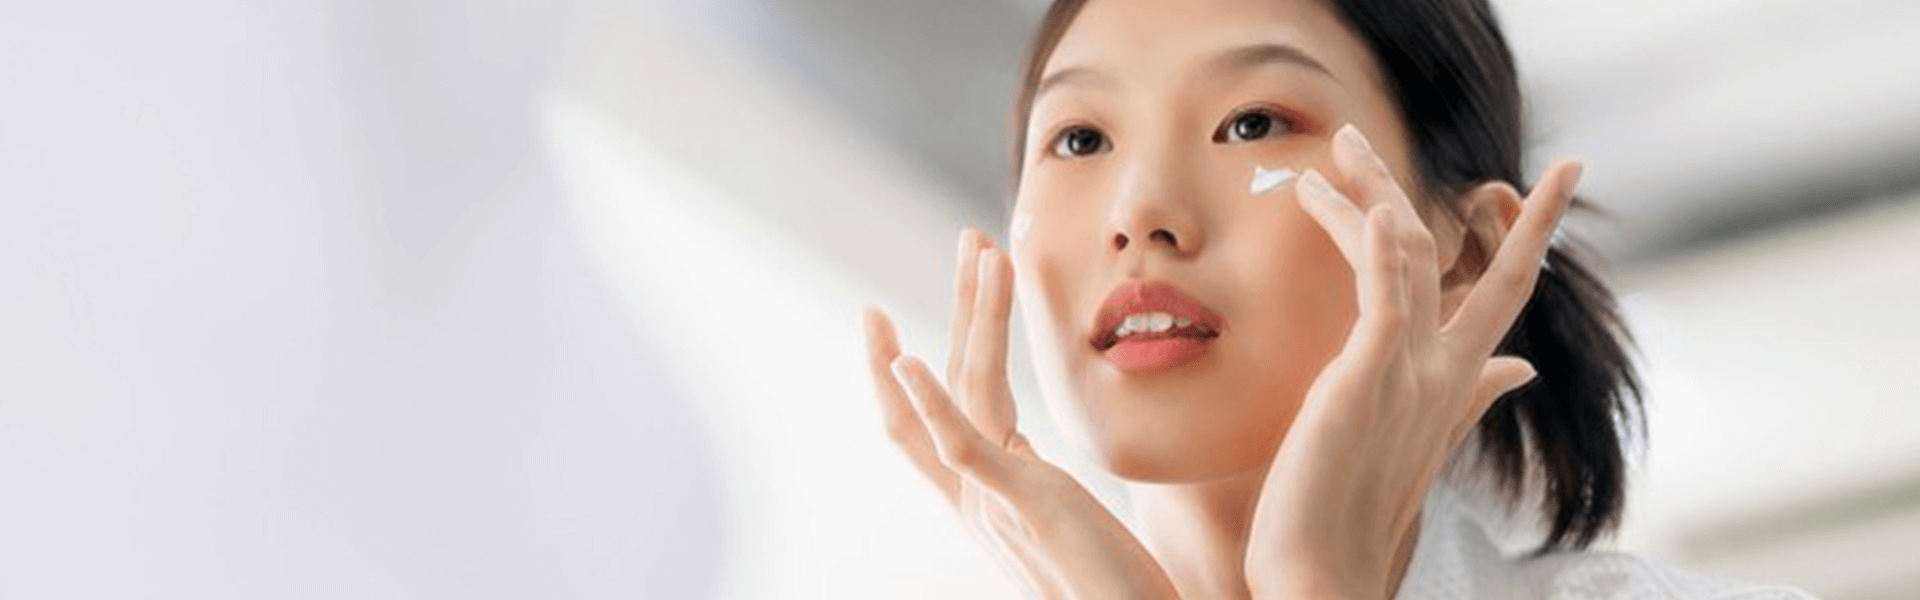 How To Treat Acne When You Have Dry Skin